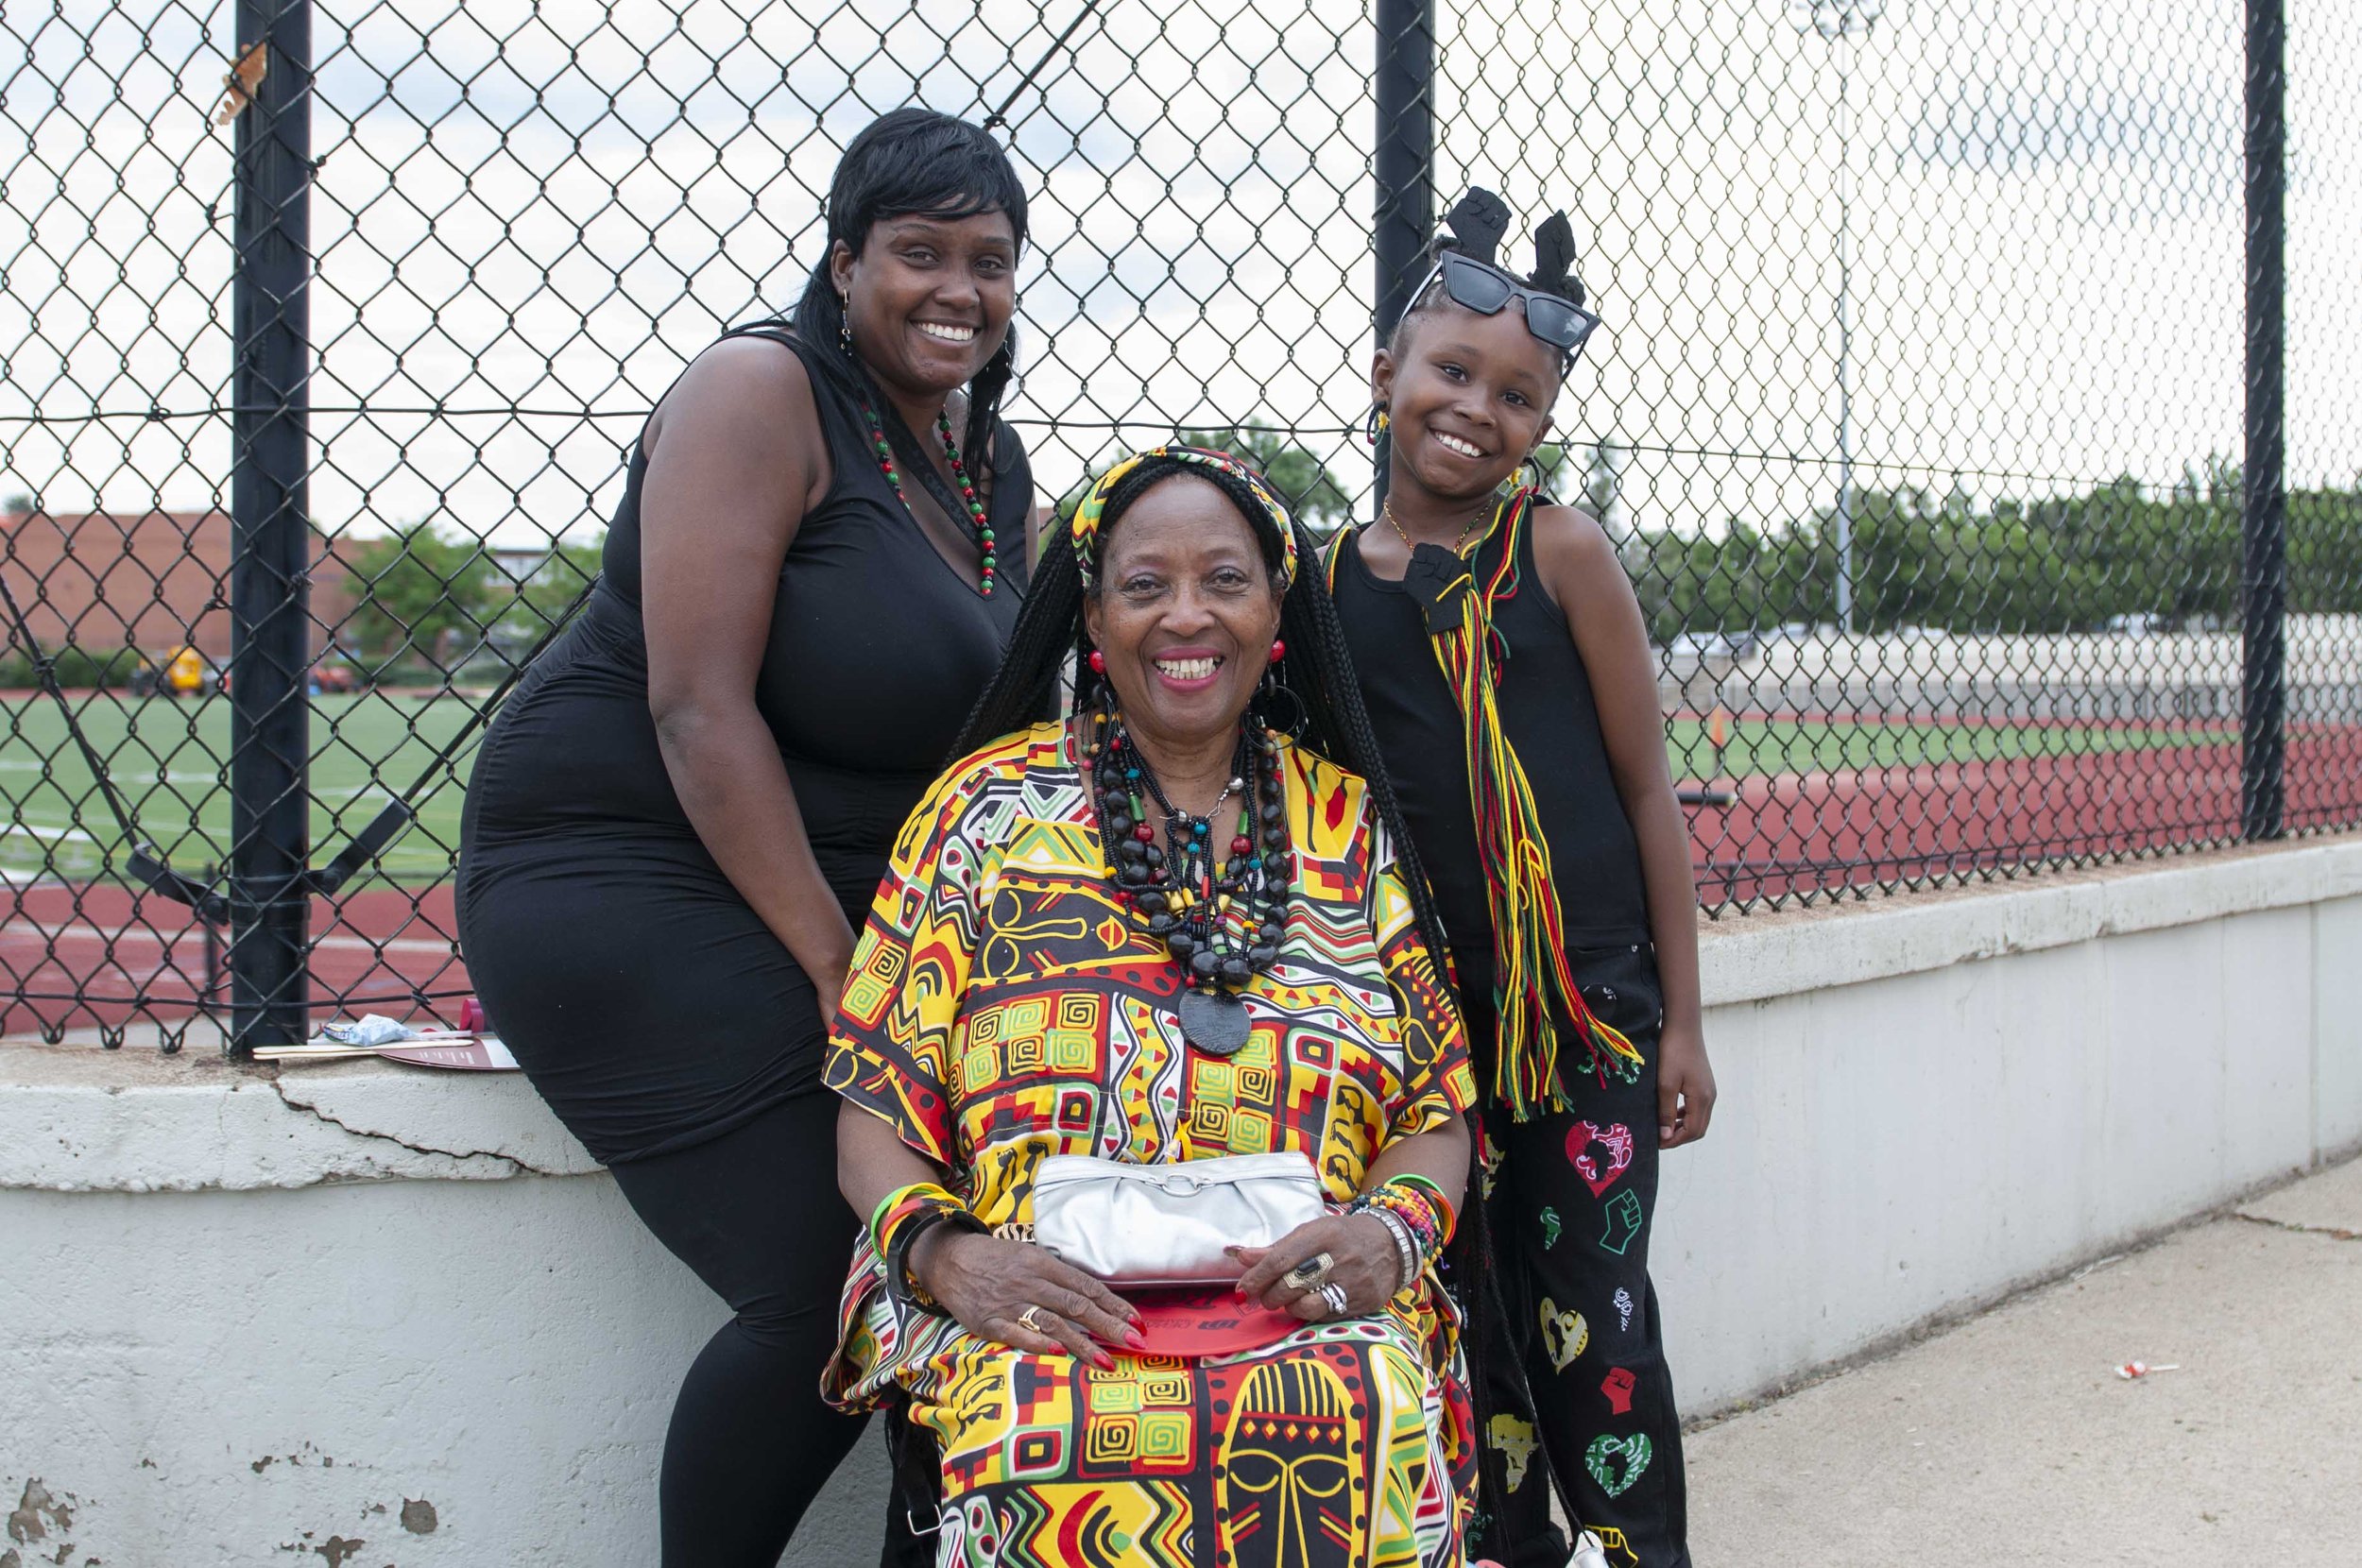    Danielle Davis (left), her daughter Danalynn Davis (right), and Annie Lewis (center), pose for a photo during the Juneteeth parade.&nbsp;   